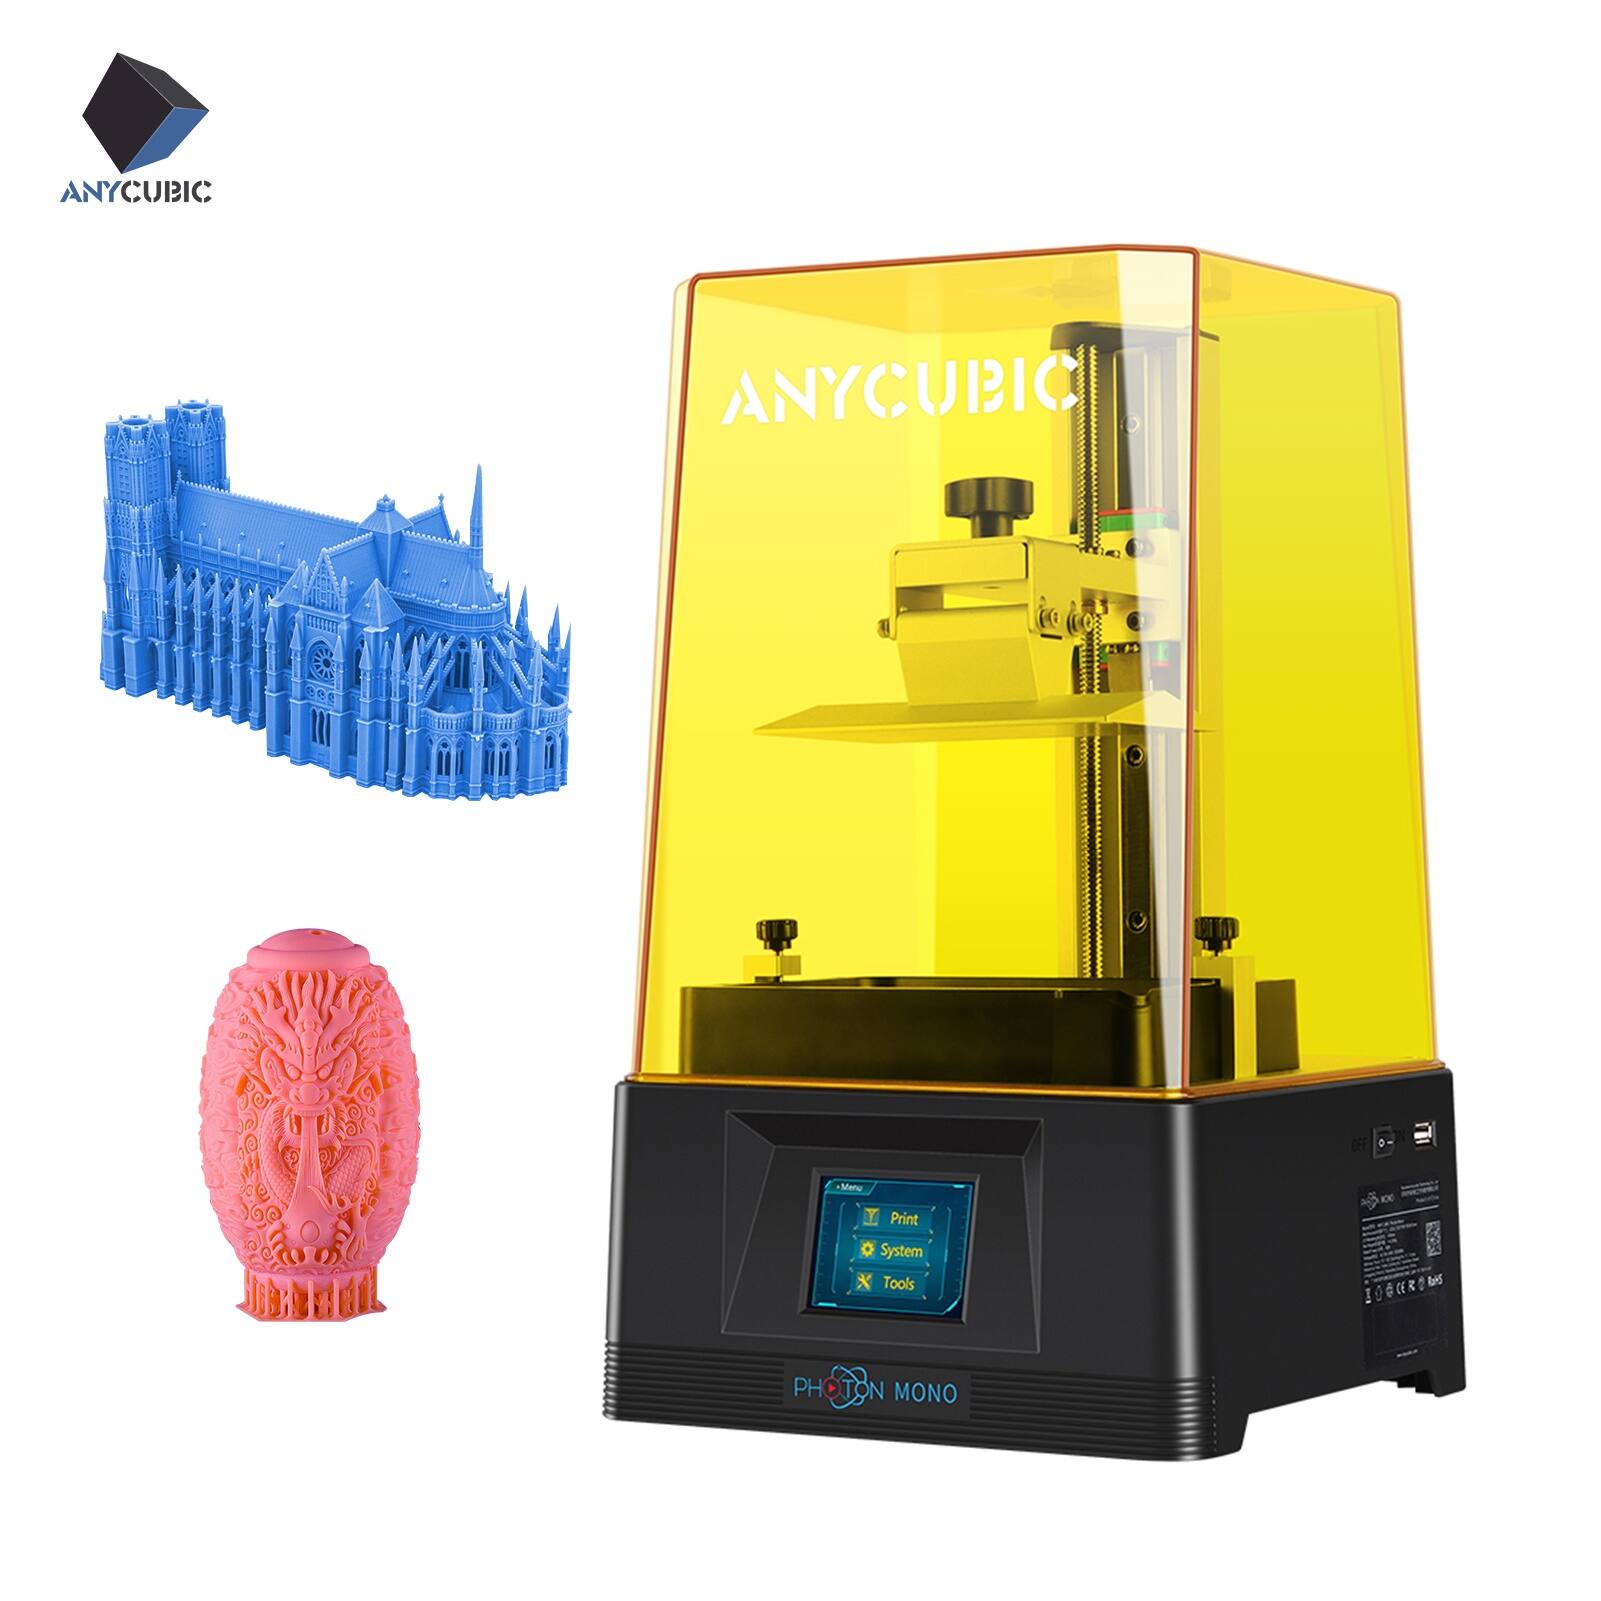 Newegg ANYCUBIC Photon Mono 3D Printer for $154.99 + Free Shipping